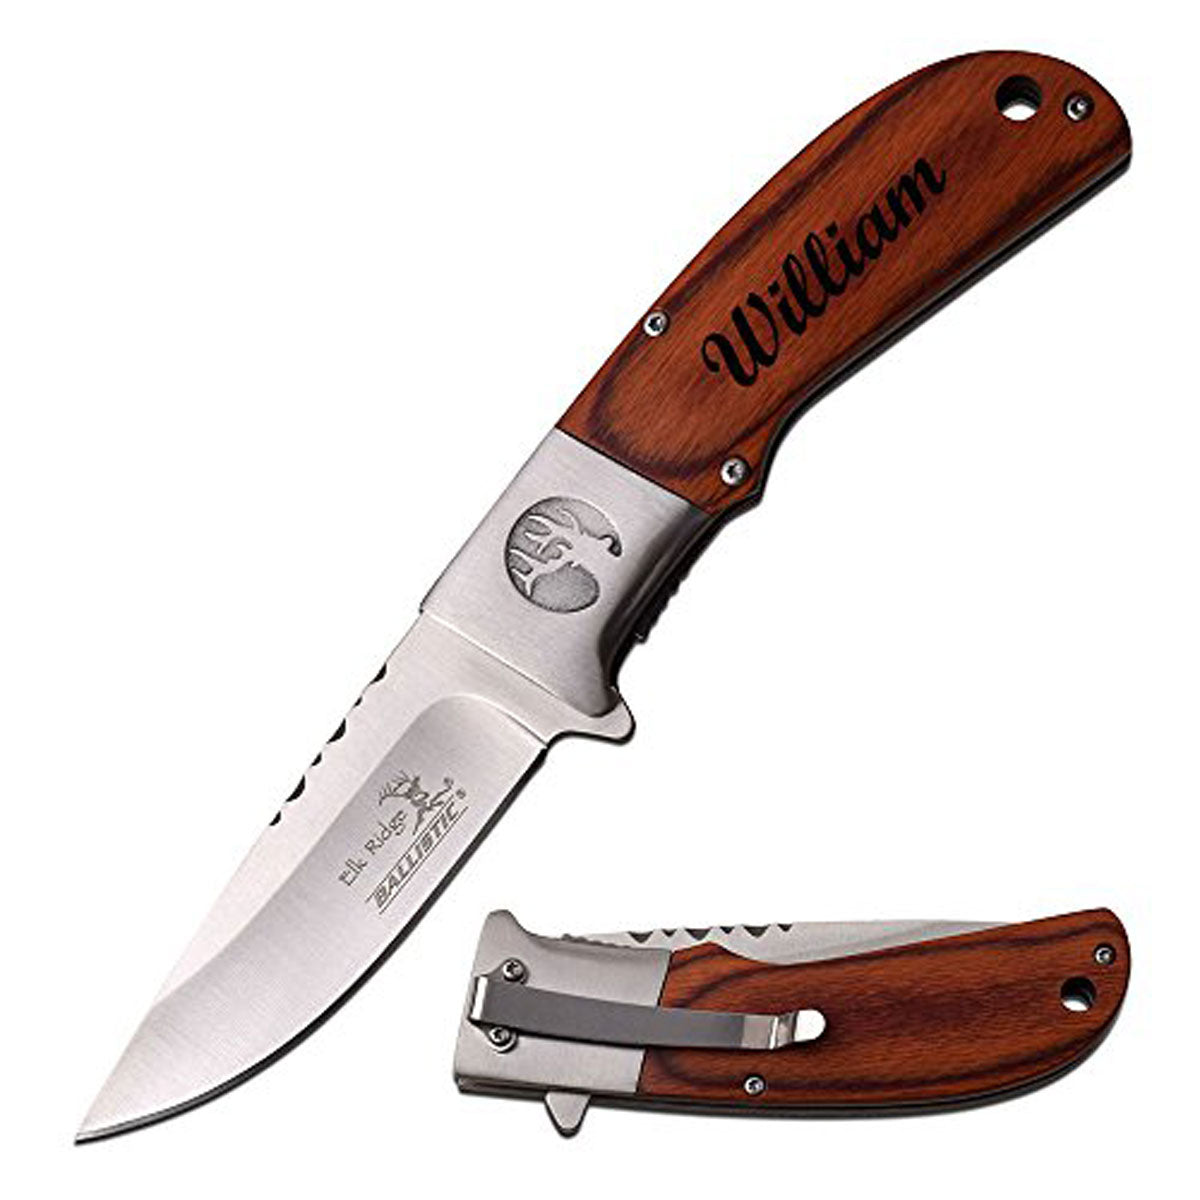 GIFTS INFINITY Personalized Laser Engraved 4.5" Closed Folding Knife, Brown wood Handle with Pocket Clip, Gifts for Dad